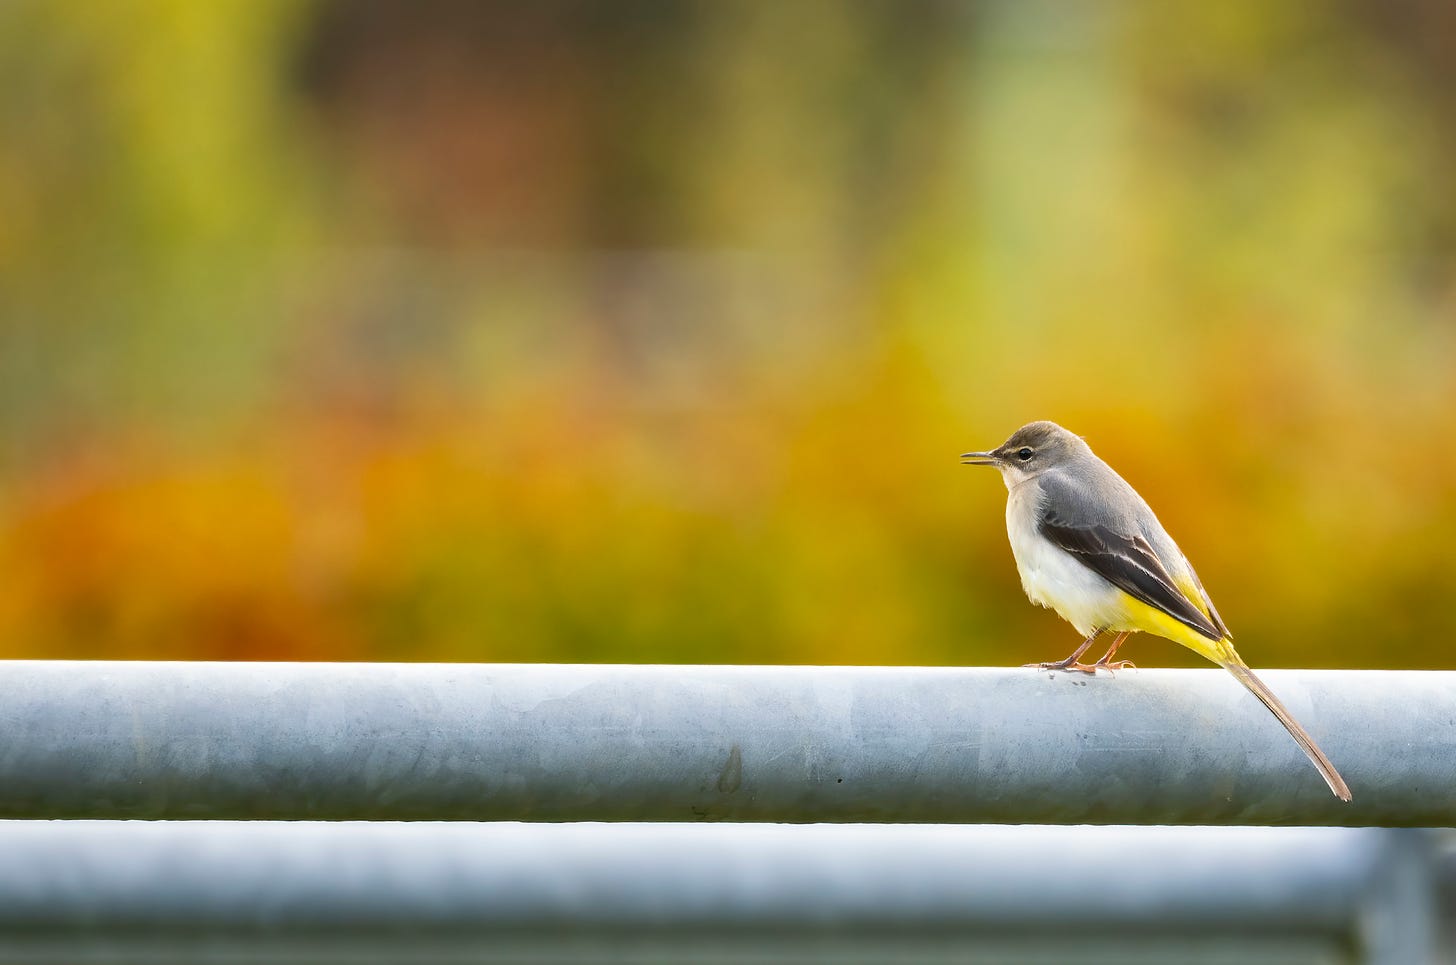 Photo of a grey wagtail perched on a metal fence with its beak open